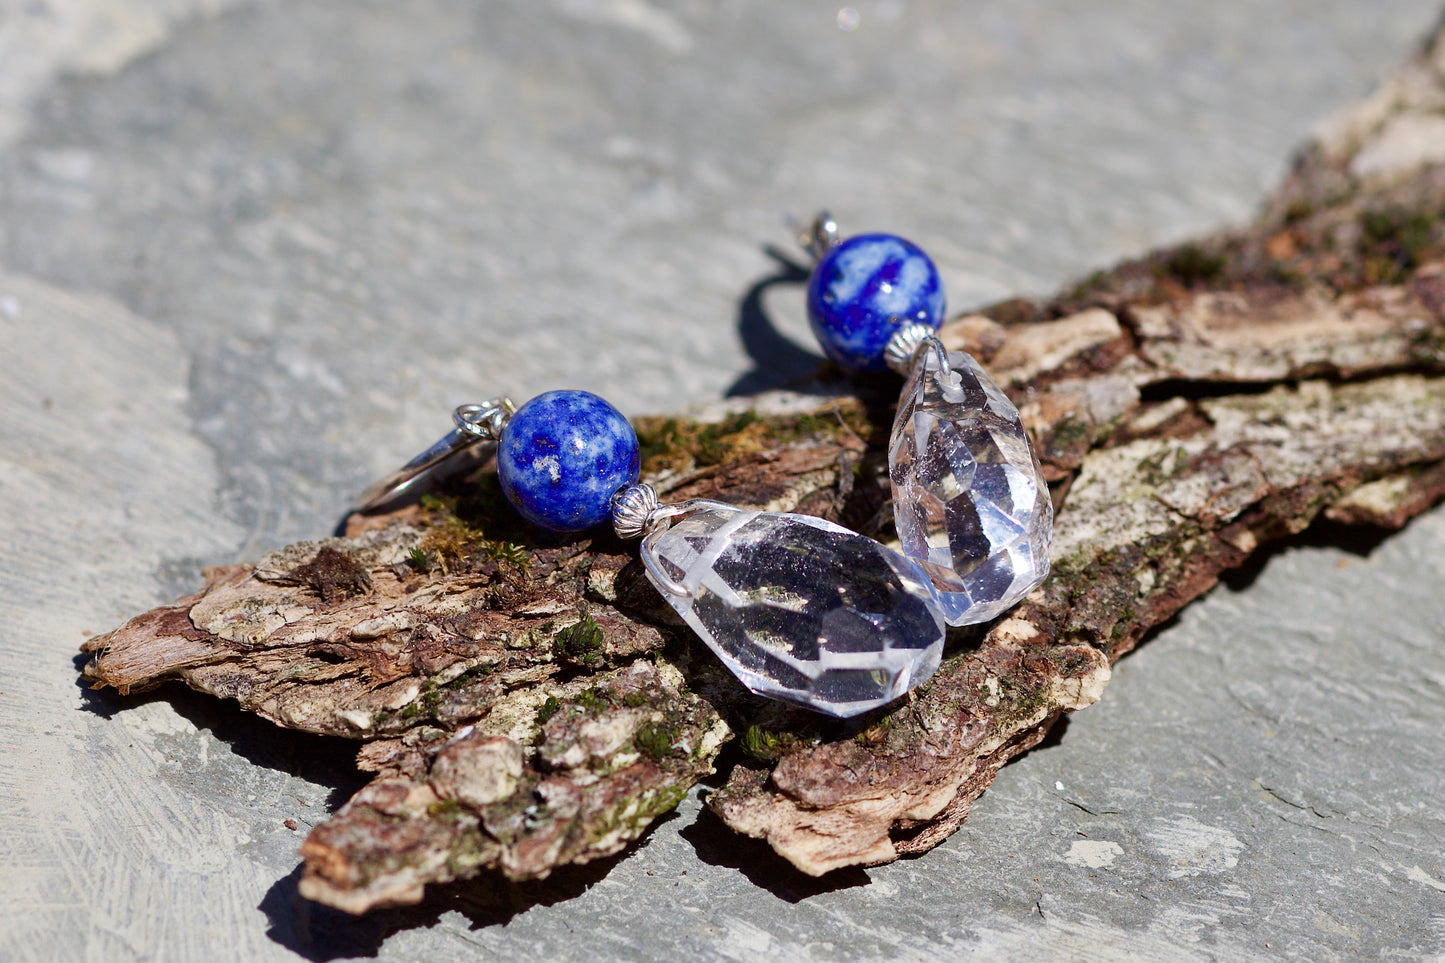 Lapis Lazuli, Faceted Clear Quartz, and Sterling Silver Earrings